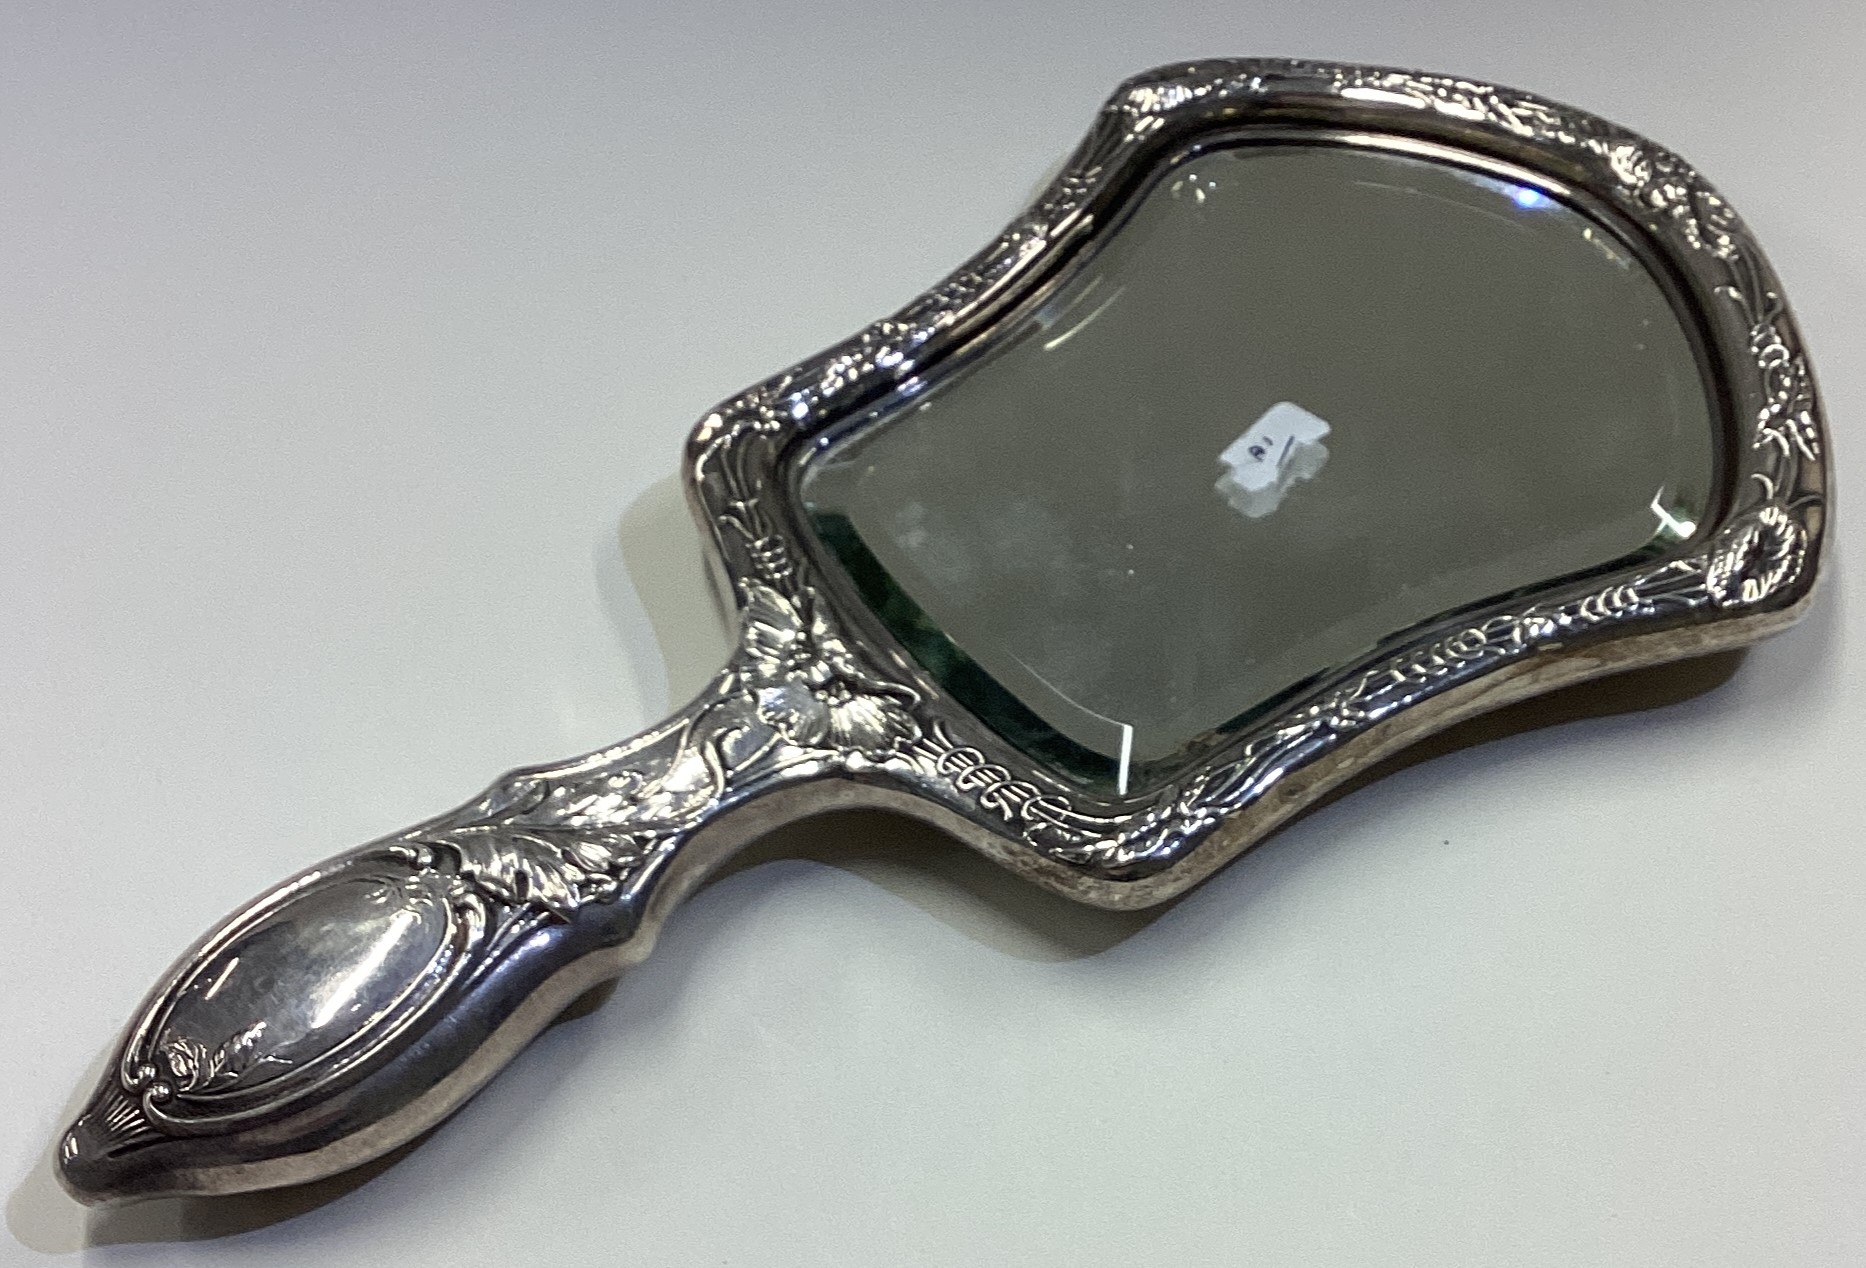 A fine and heavy Gorham silver mirror heavily chased with flowers. - Image 2 of 2